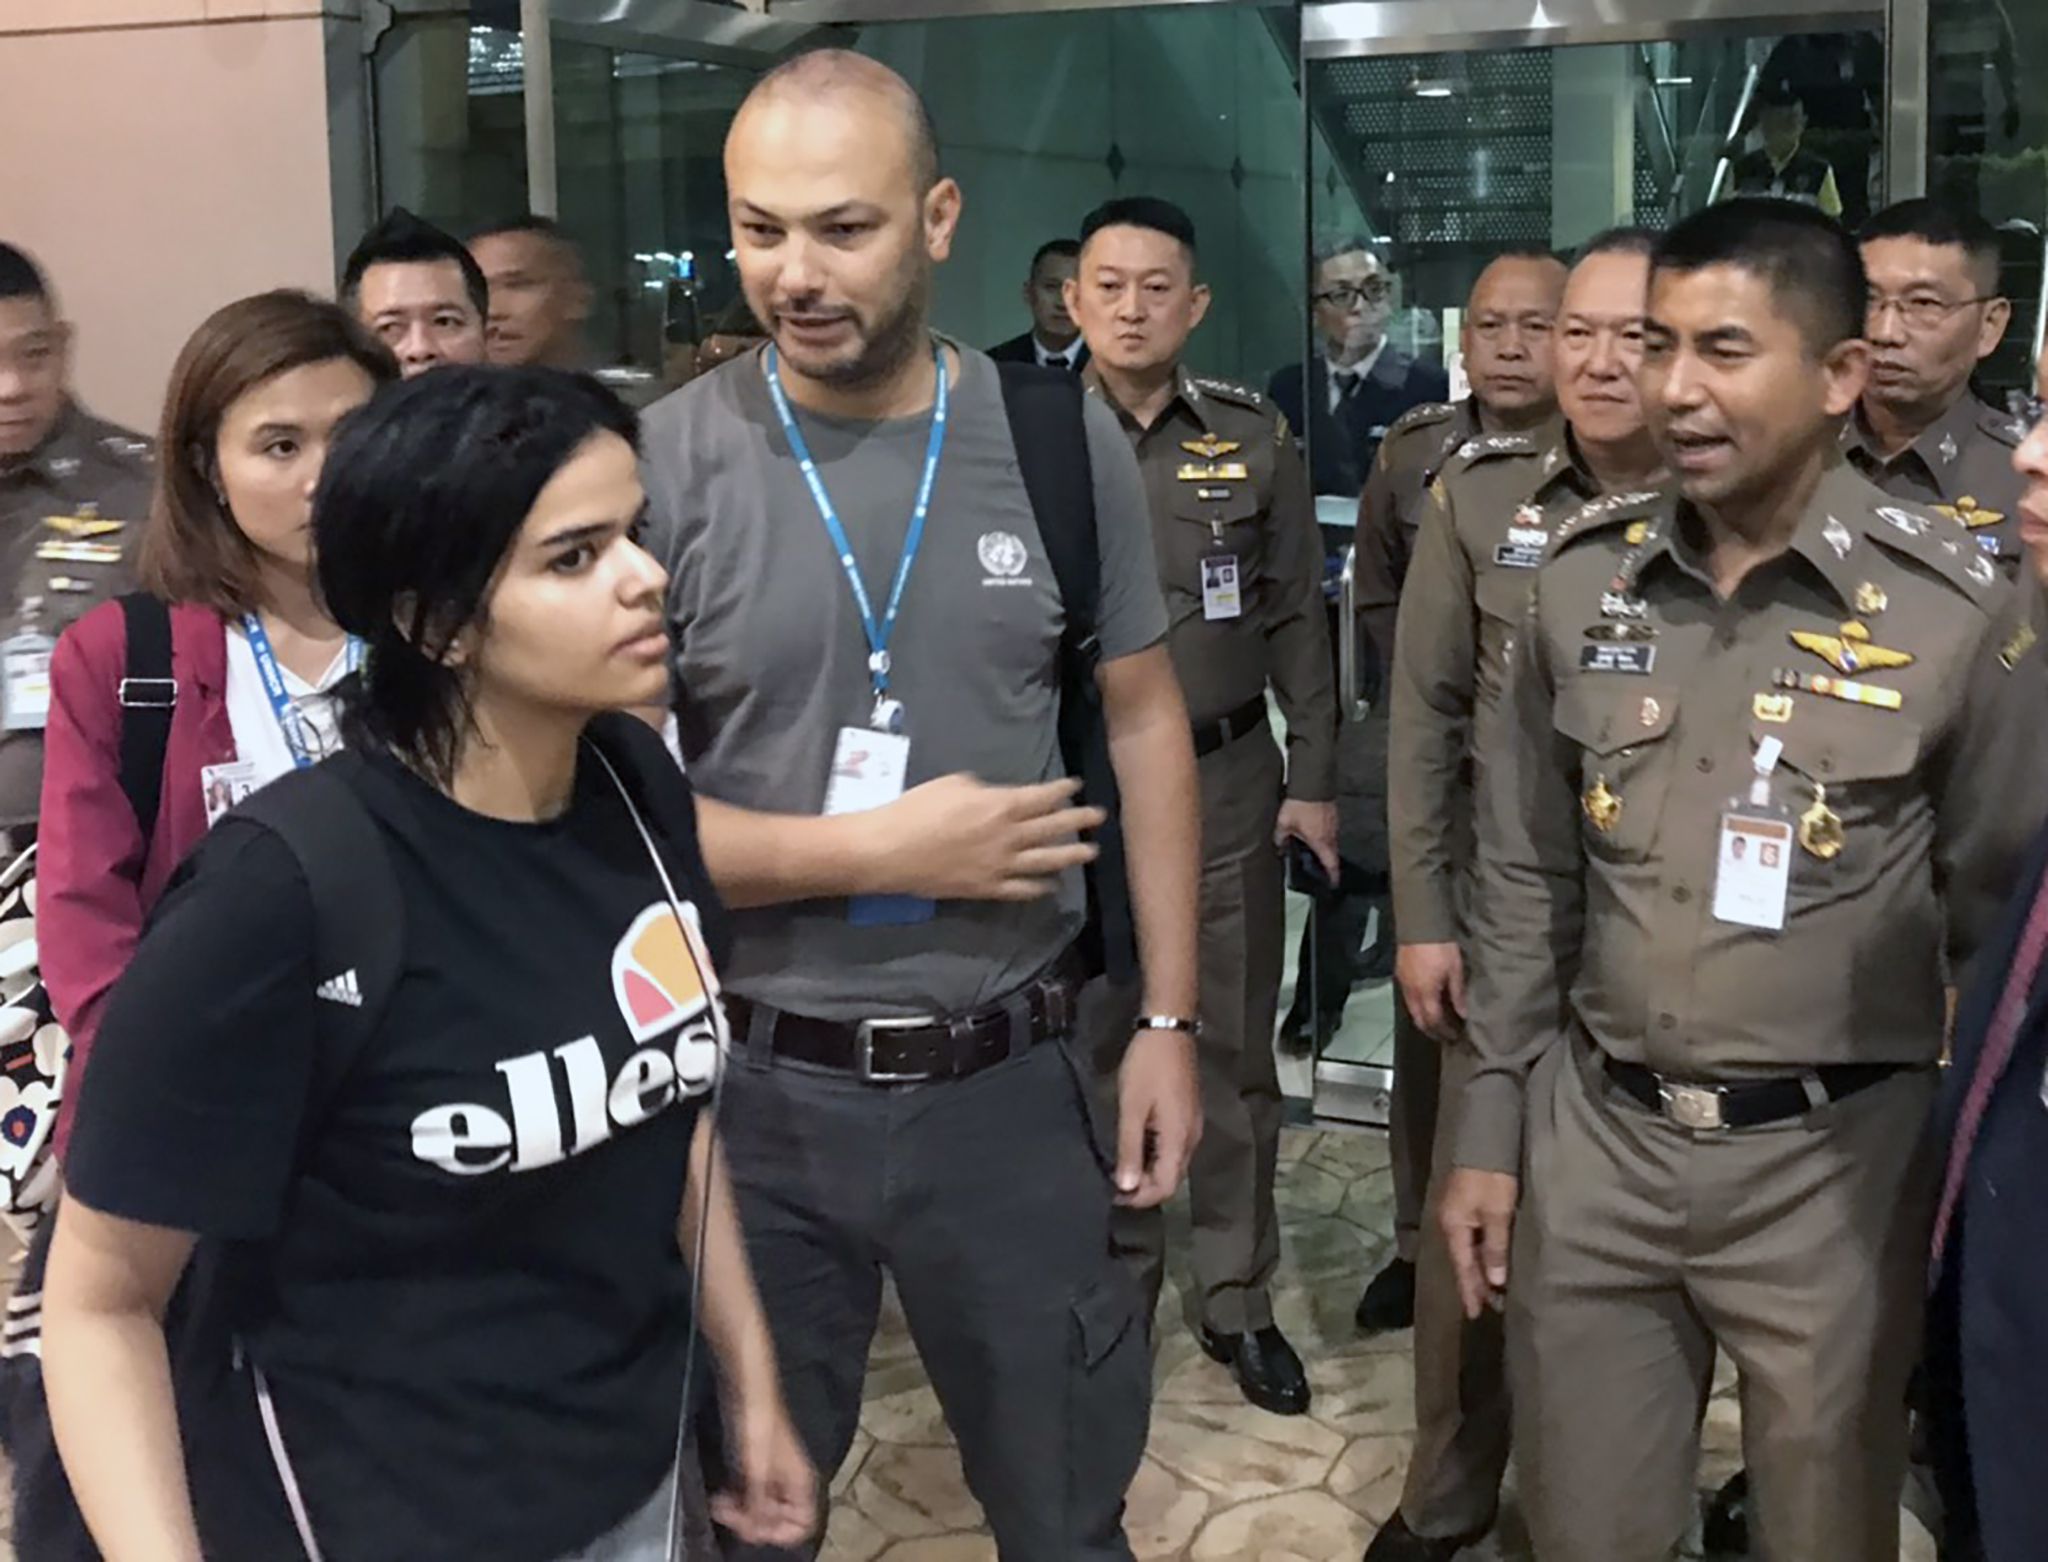 A handout photo made available by the Thai Immigration Bureau shows Saudi woman who seeking for asylum Rahaf Mohammed al-Qunun talks with Thai Immigration Police Chief Surachet Hakparn at the Suvarnabhumi international airport in Samut Prakan province, on the outskirts of Bangkok, Thailand, on Jan. 7, 2019. The Saudi teen was stopped at the airport as she was traveling to Australia for asylum after she claimed that she was abused by her family. (THAI IMMIGRATION BUREAU HANDOUT/EPA-EFE/REX/Shutterstock)